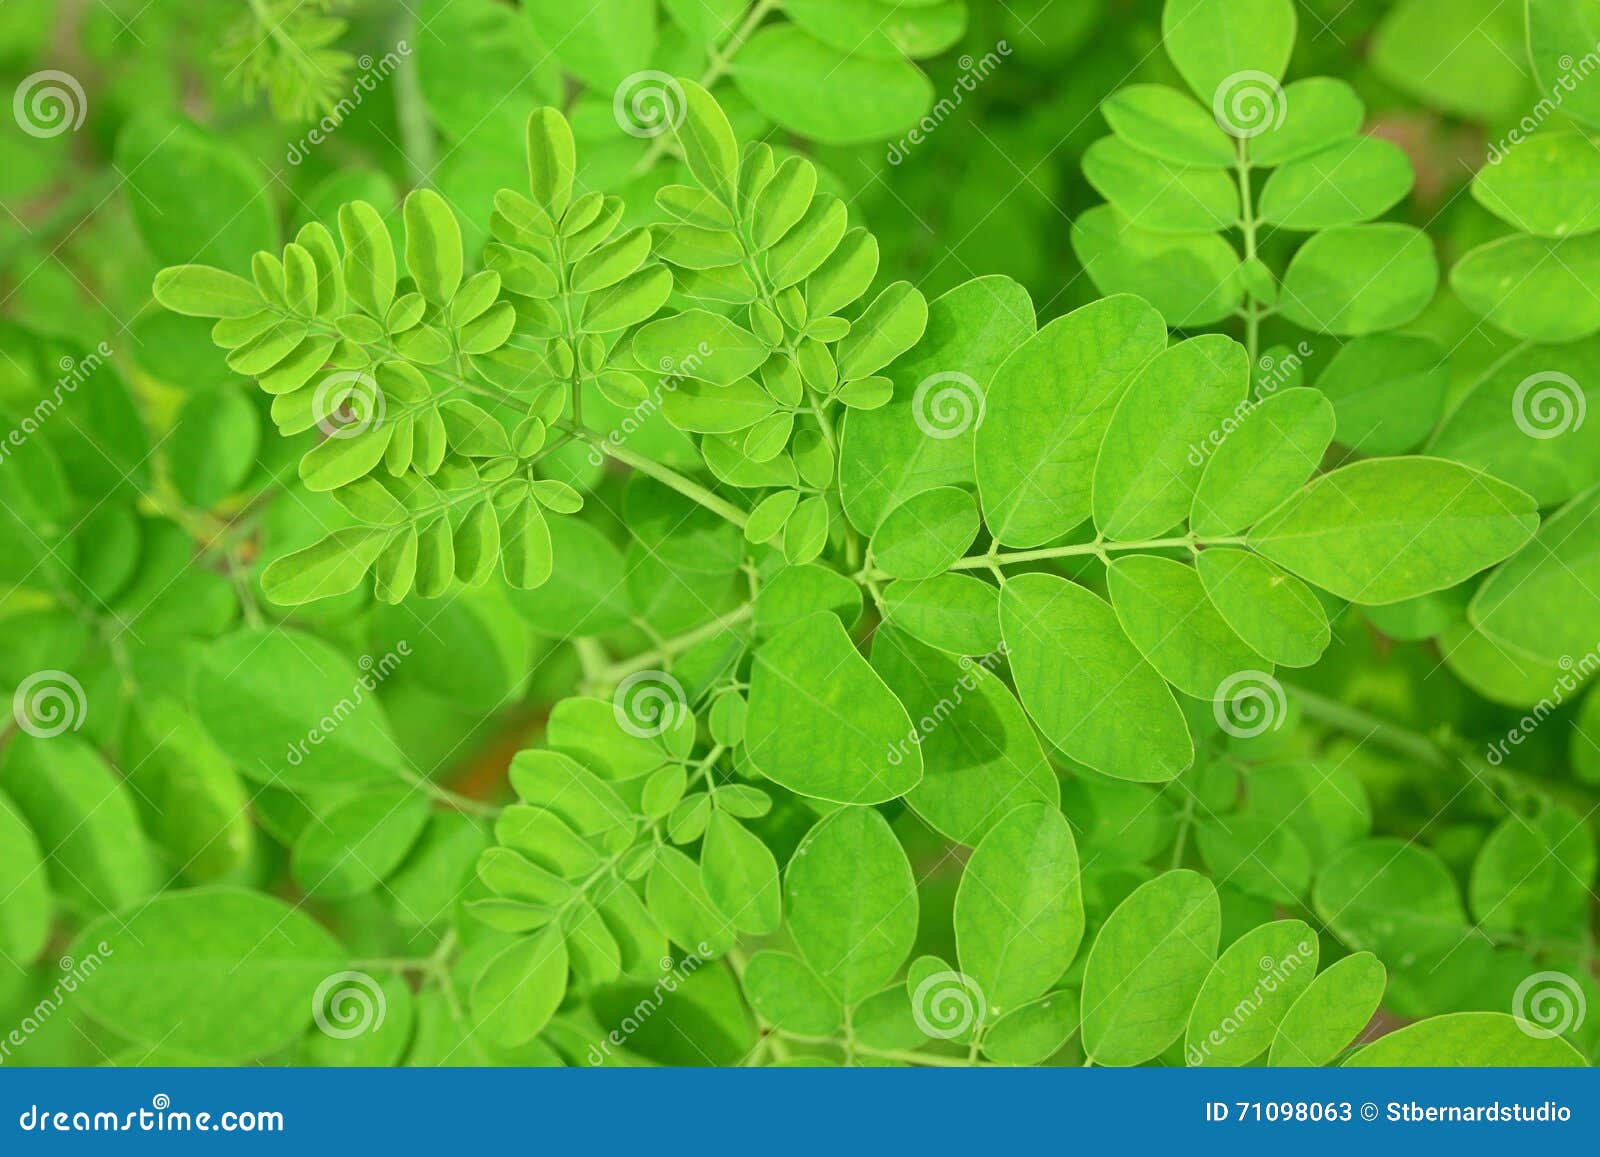 young fresh green rounded leaves of herb moringa oleifera popular for its medicinal properties and health benefits